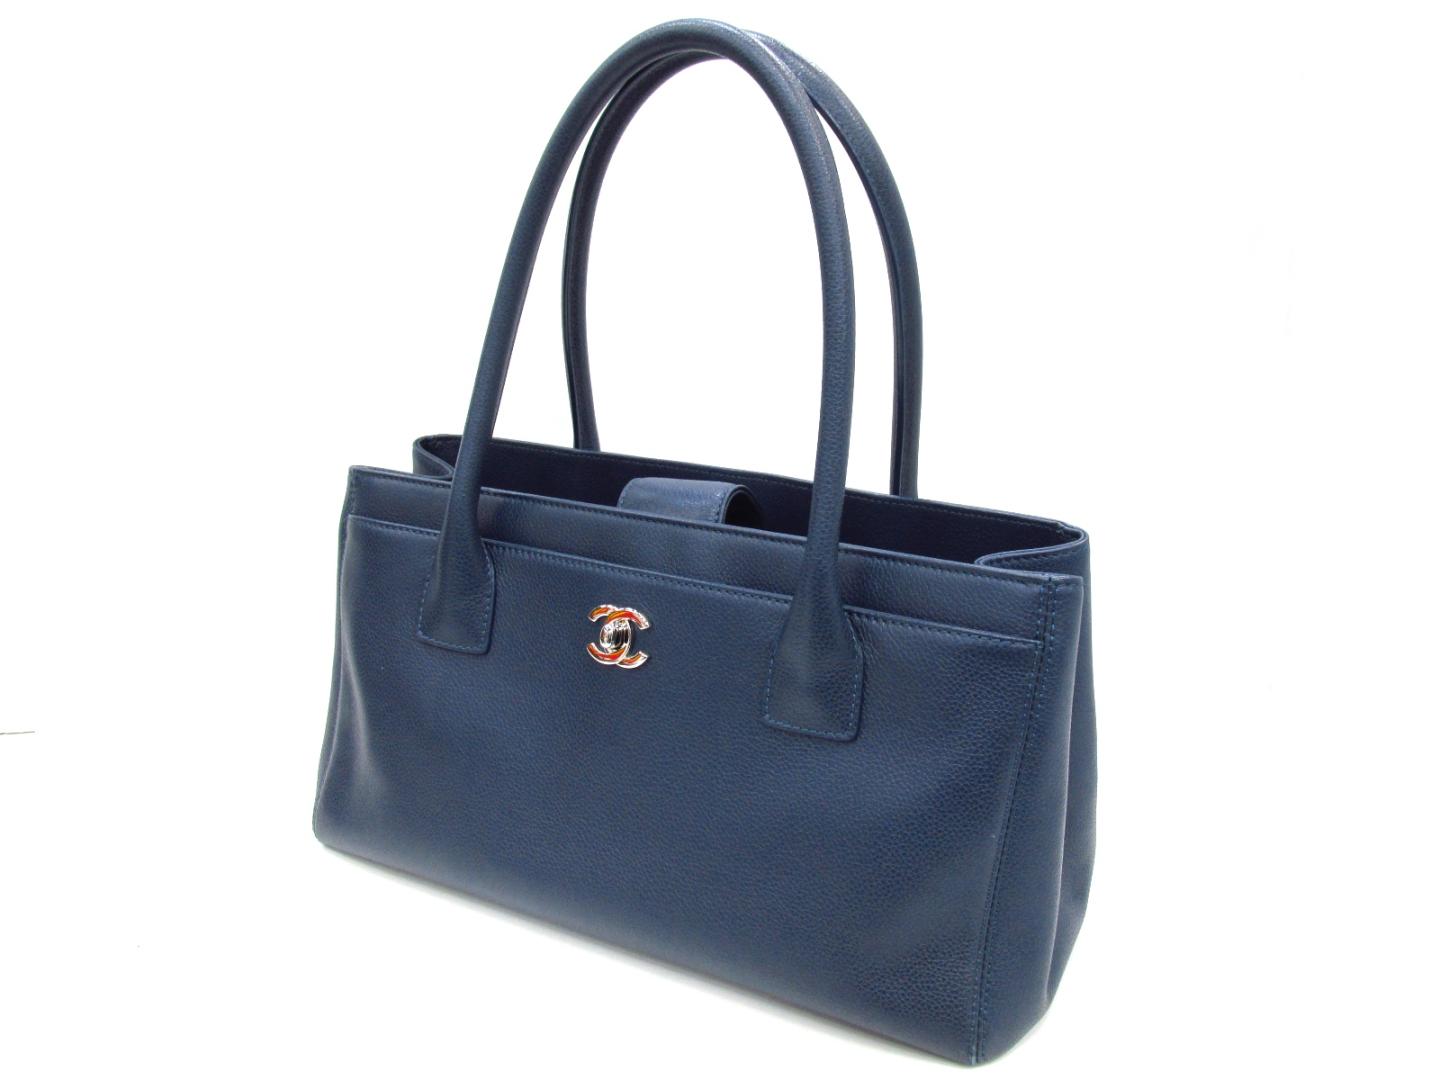 Chanel - Blue Leather Large Executive Tote Bag – Every Watch Has a